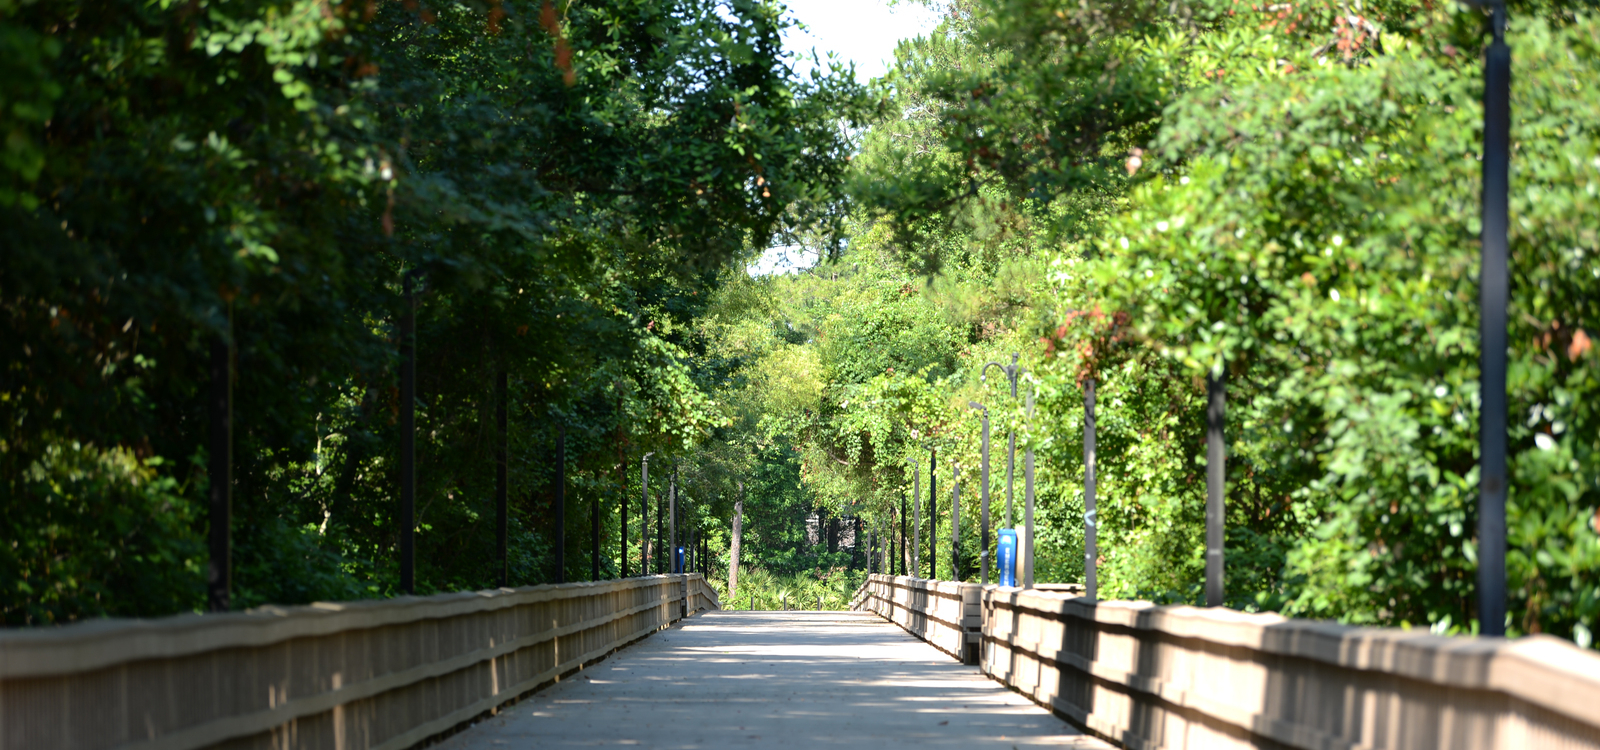 Empty boardwalk on campus surrounded by greenery and trees